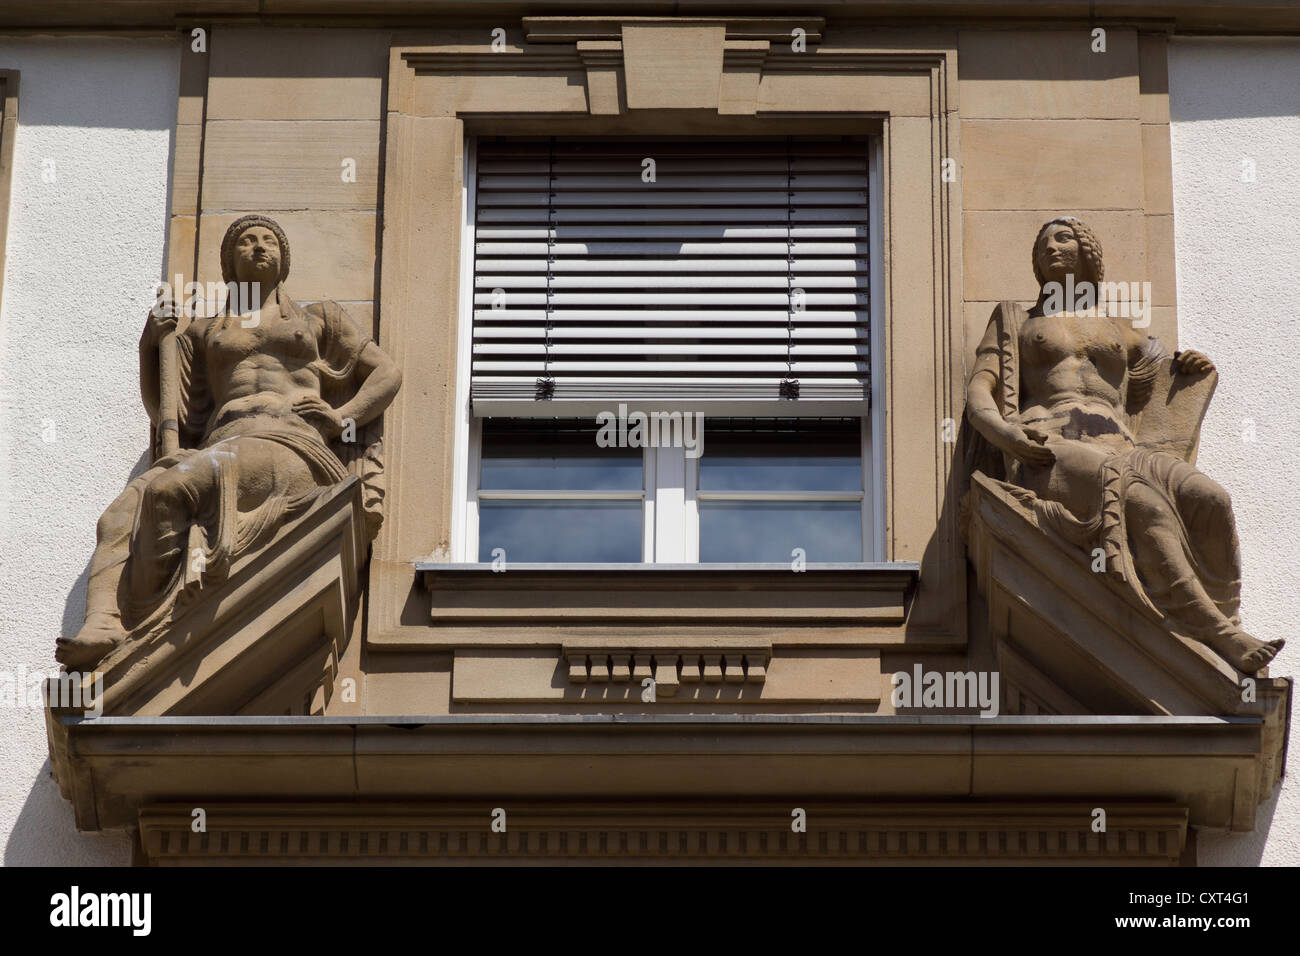 Sculptures next to a window, courthouse, judicial authorities, Frankfurt am Main, Hesse, Germany, Europe Stock Photo